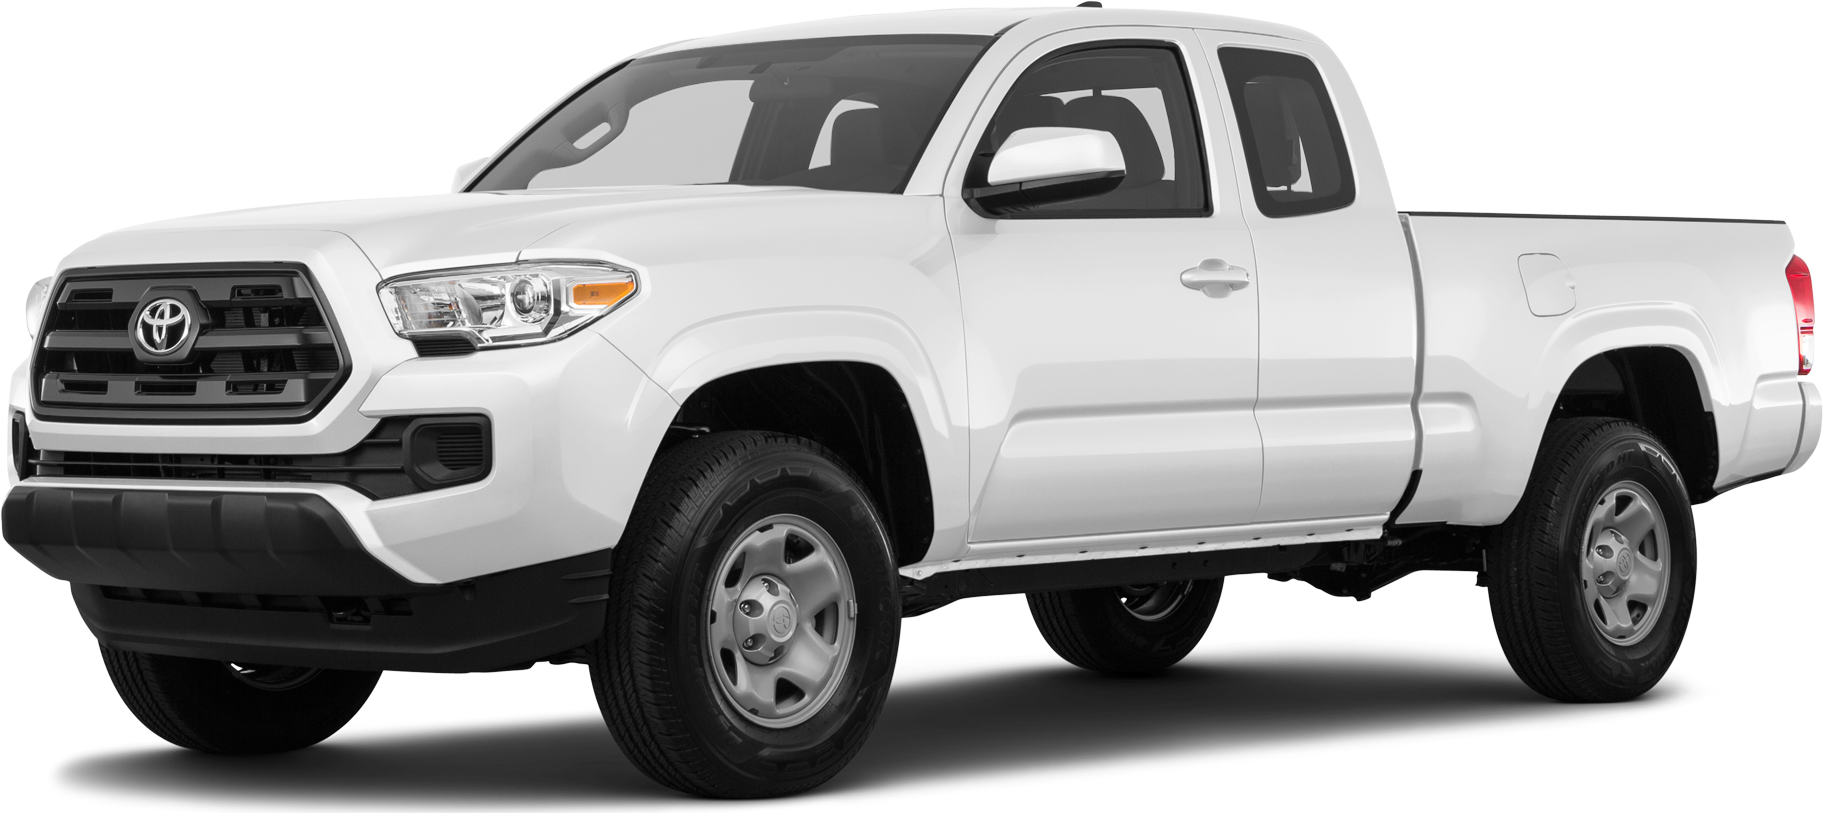 2017 Toyota Tacoma Values & Cars for Sale | Kelley Blue Book